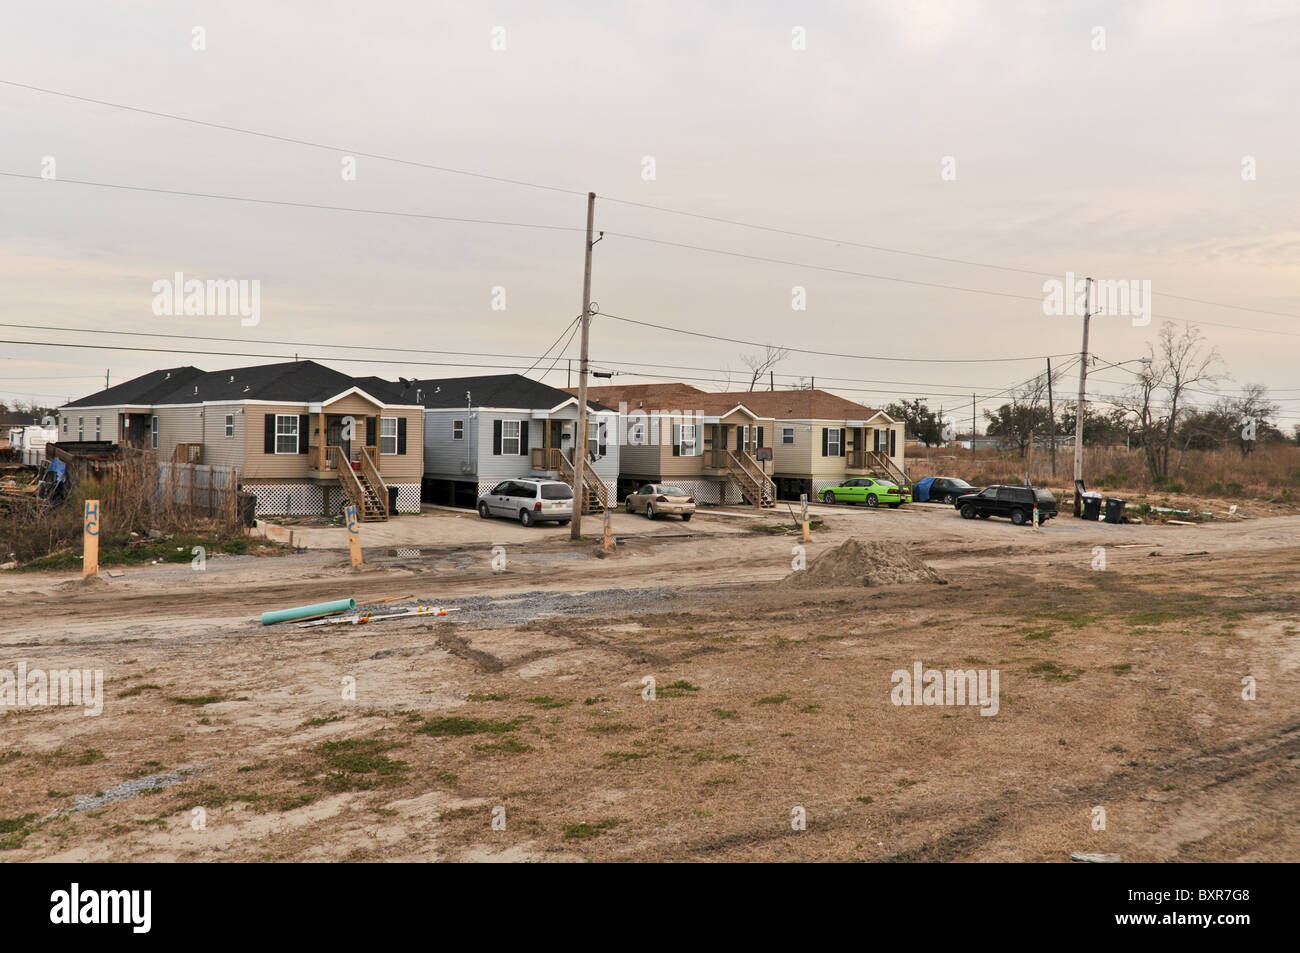 New houses in Lower 9th Ward after Hurricane Katrina flood, New Orleans, Louisiana Stock Photo